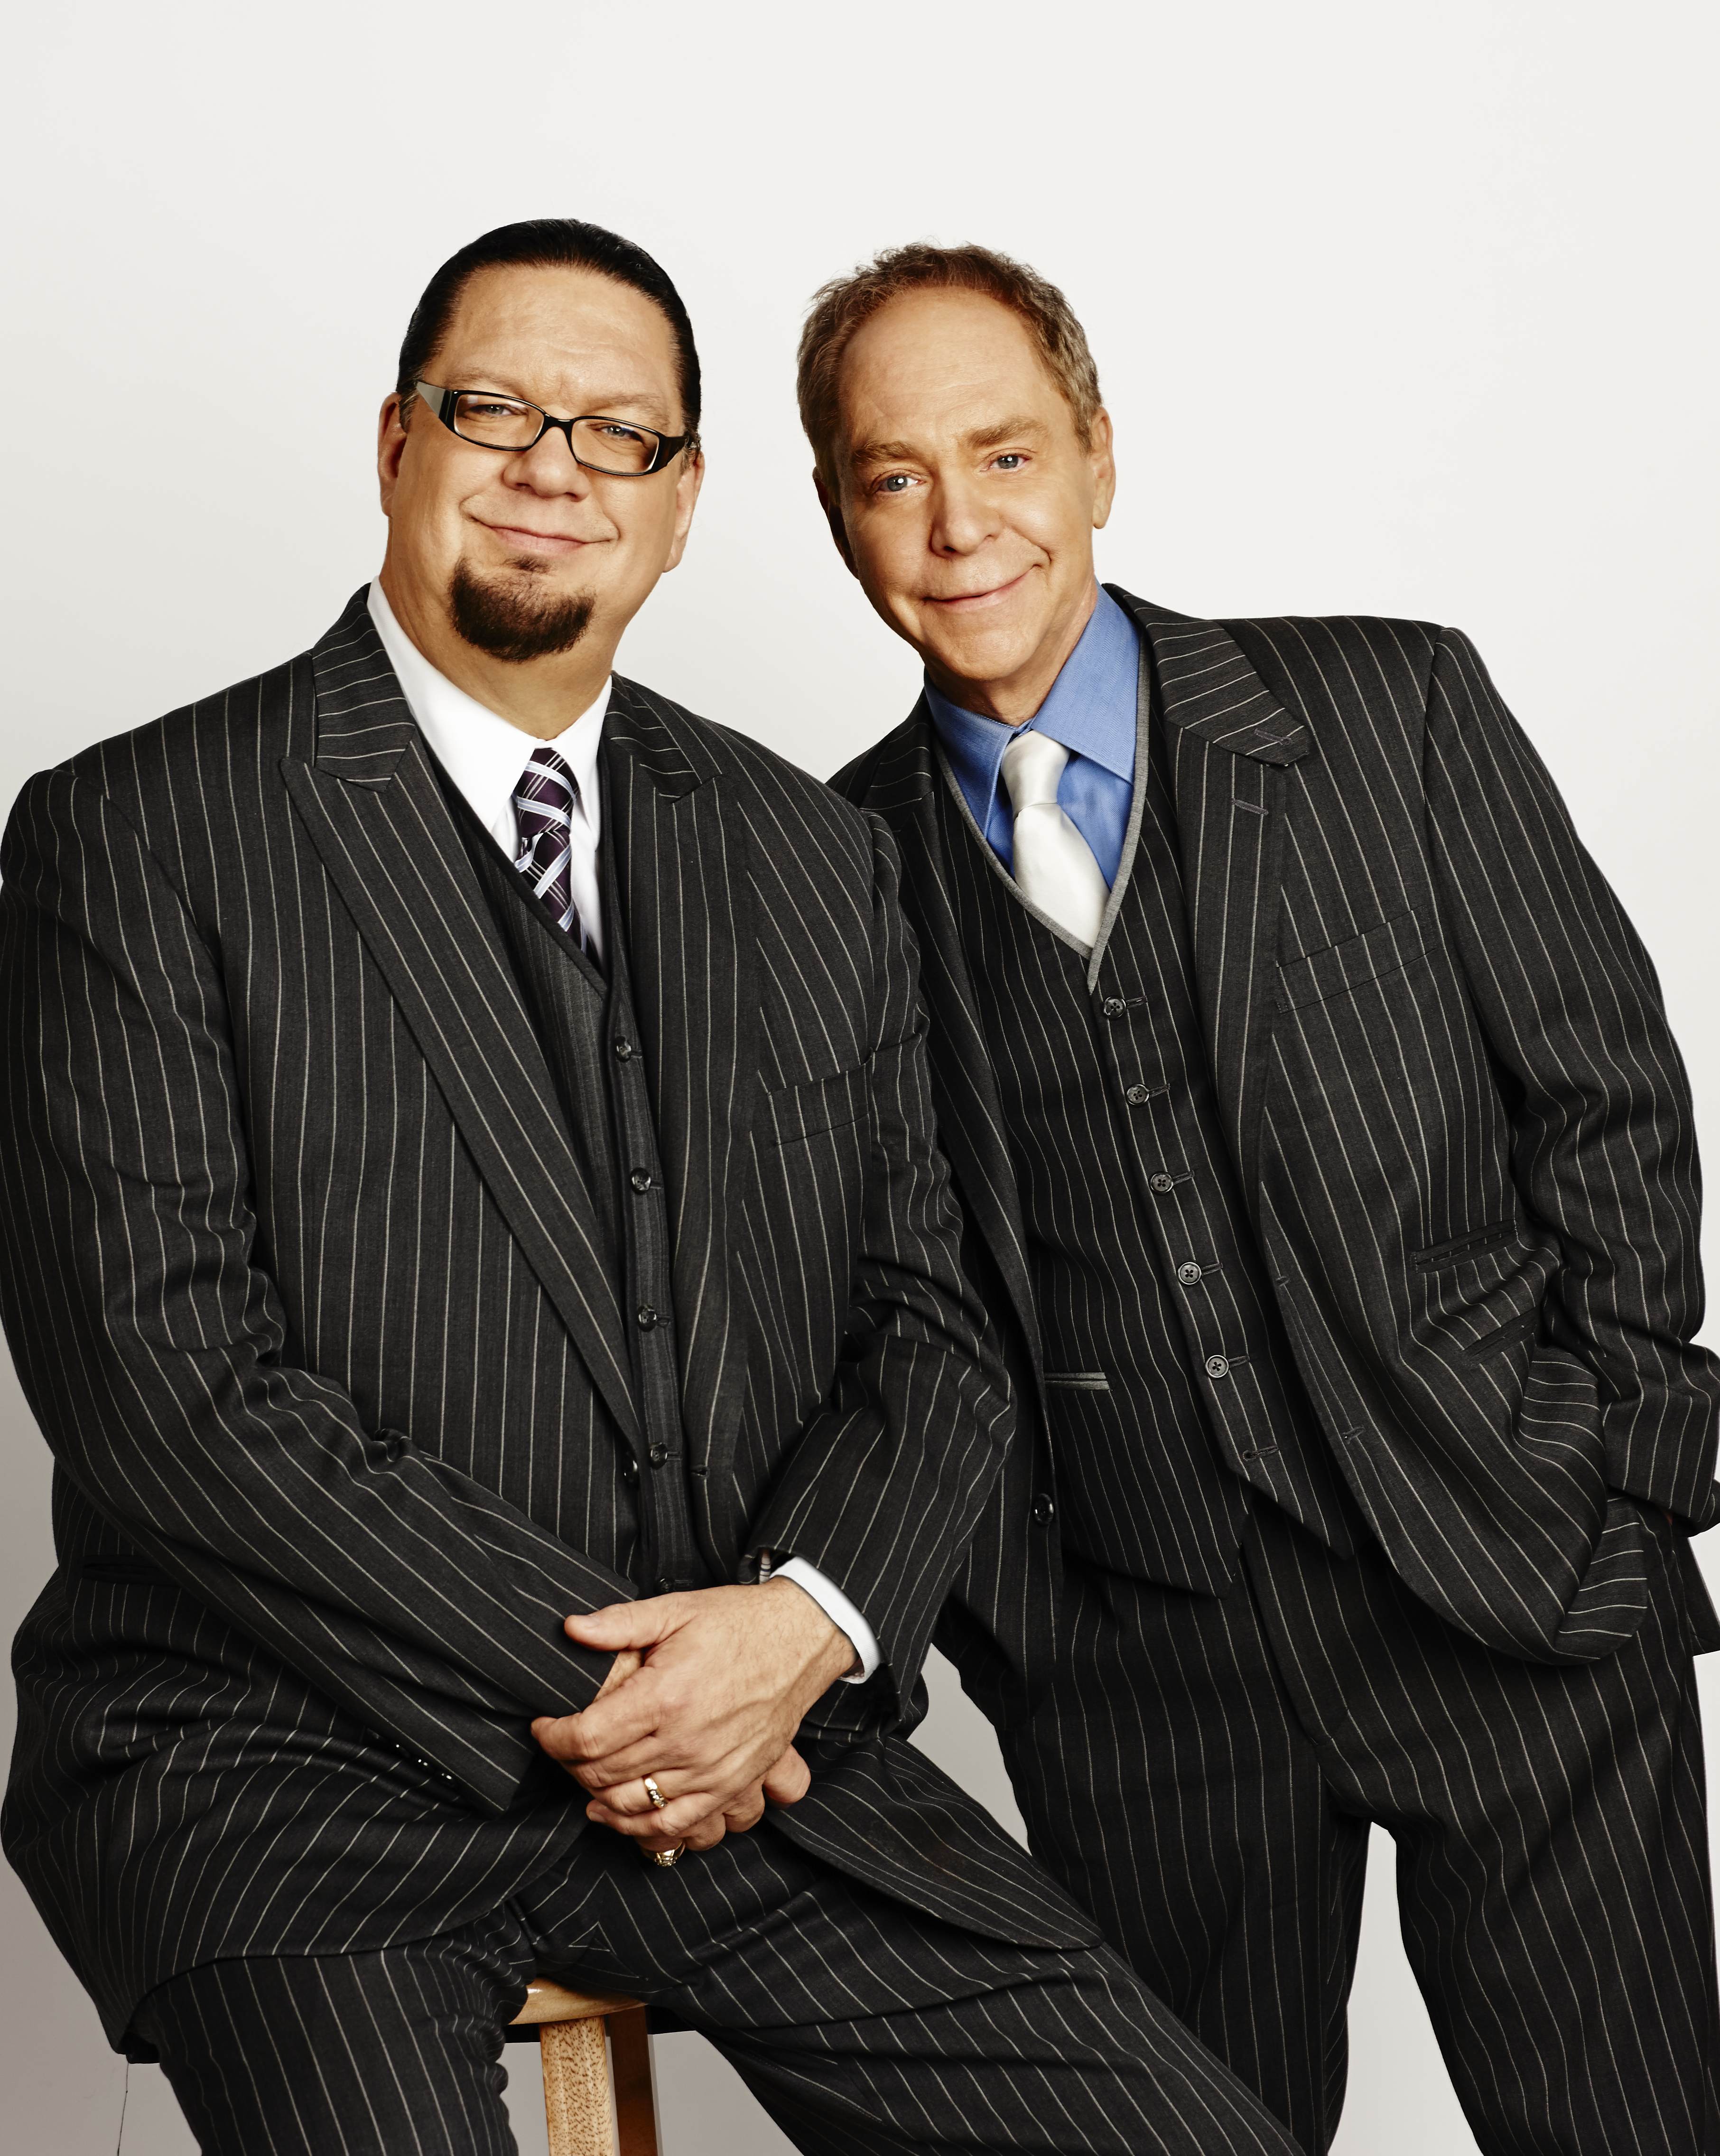 Comedic Illusionists, Penn and Teller, Bring their Magic Act to The